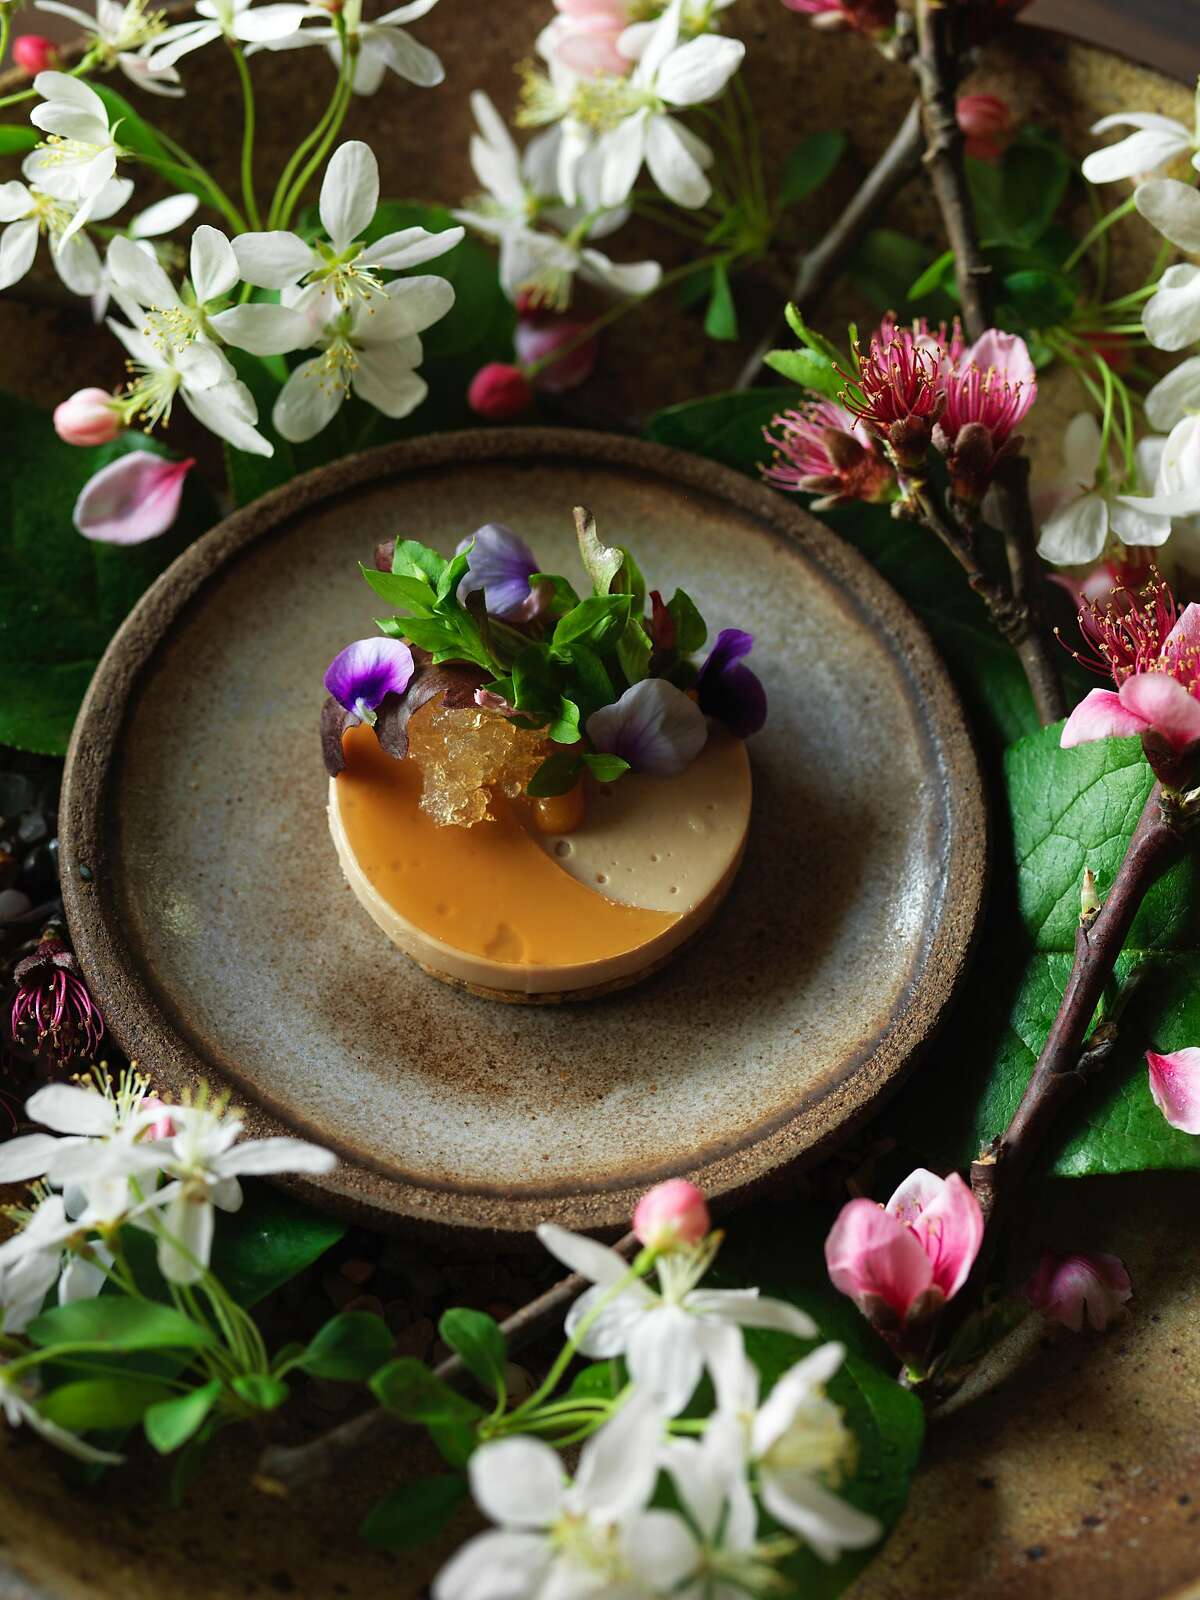 HEALDSBURG, CALIF - March 19, 2017: Foie gras with gelee of momo-shu (a peach wine we made with last year's green peaches), pickled peach blossoms, seeded sable', olive oil jam, and almond cream at SingleThread Farms in Healdsburg. PHOTO BY JOHN LEE